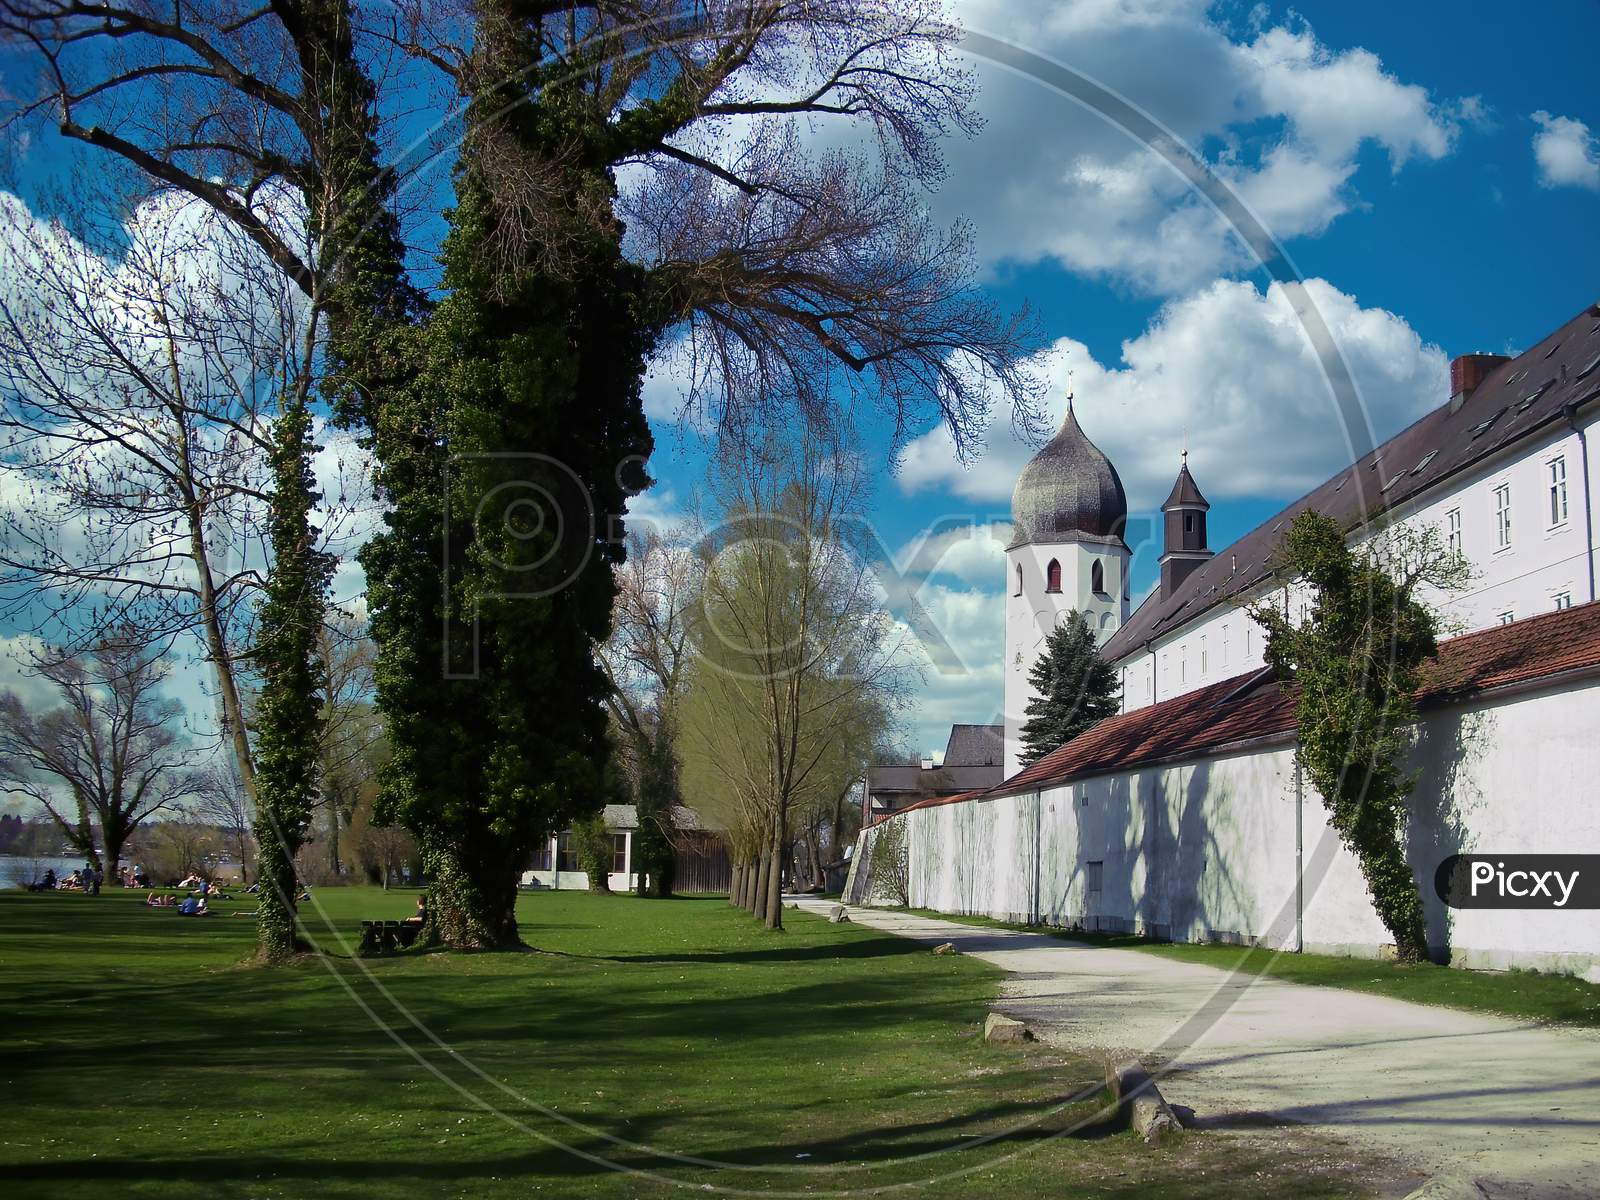 The exterior of the monastery called Frauenwörth on the island Frauenchiemsee in the Bavarian lake called Chiemsee at a sunny and cloudy day in summer.